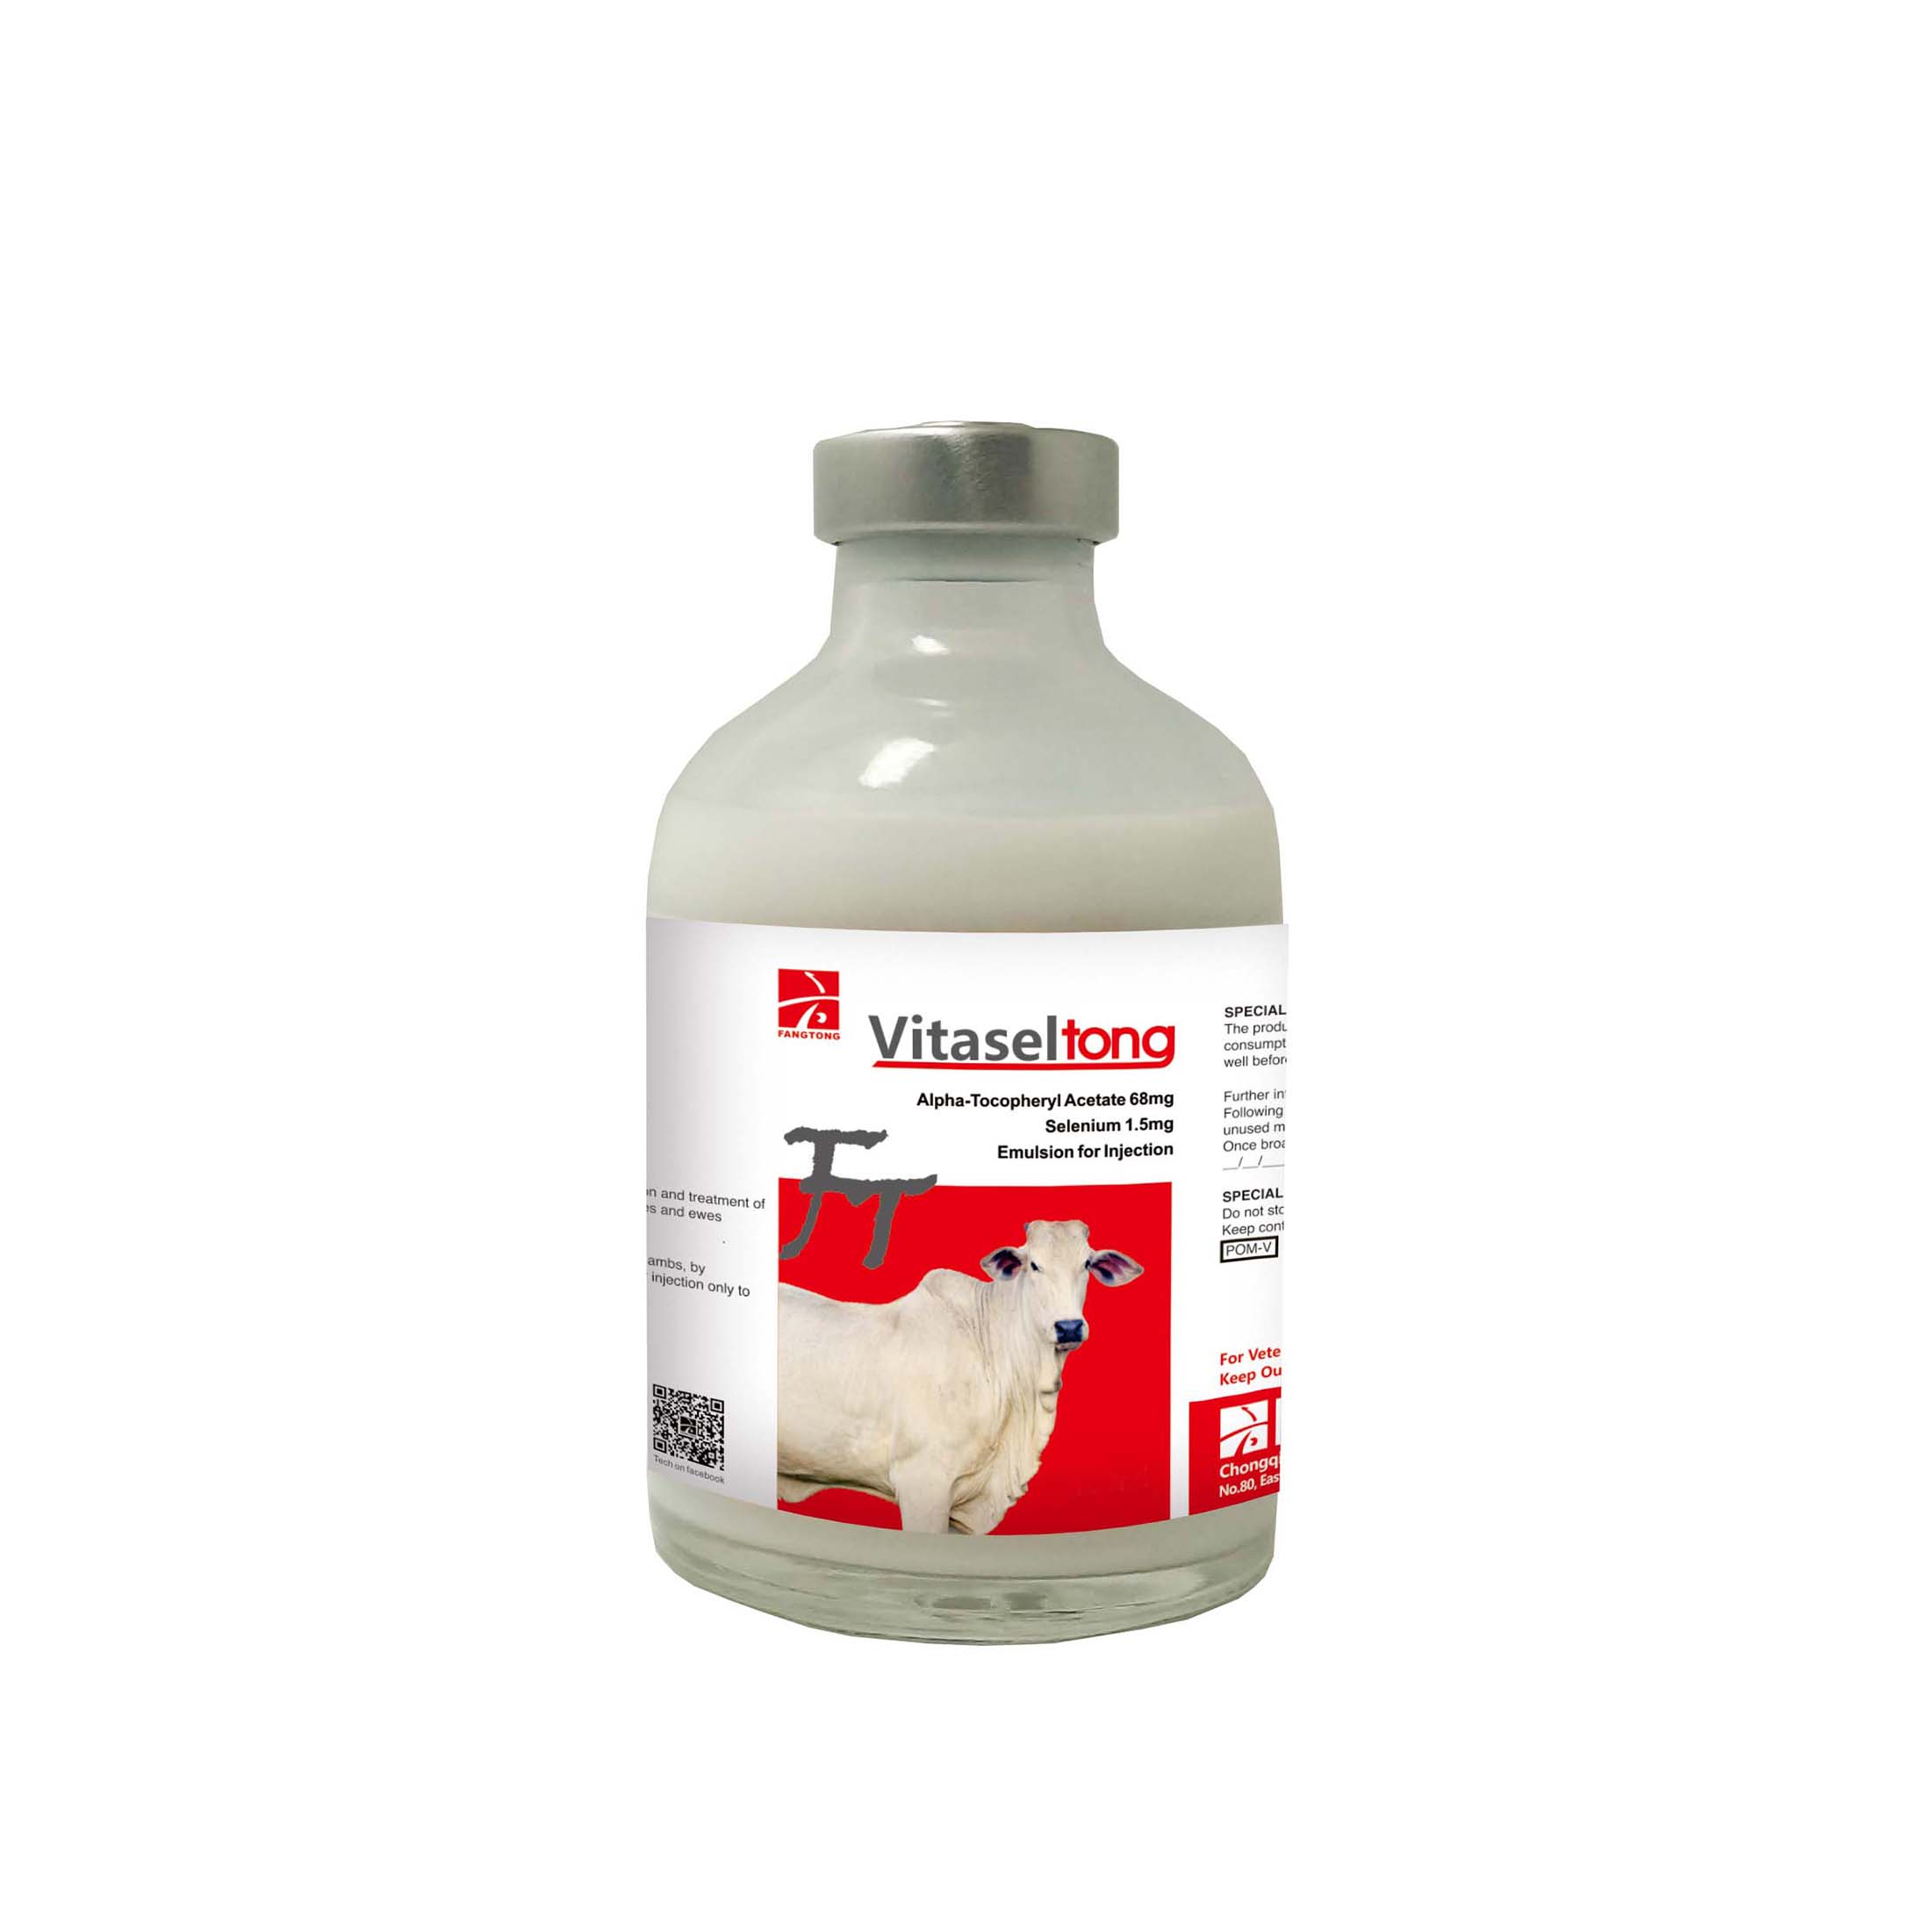 Vitaseltong-Alpha-Tocopheryl Acetate 68mg+Selenium 1.5mgn Emulsion for injection Featured Image